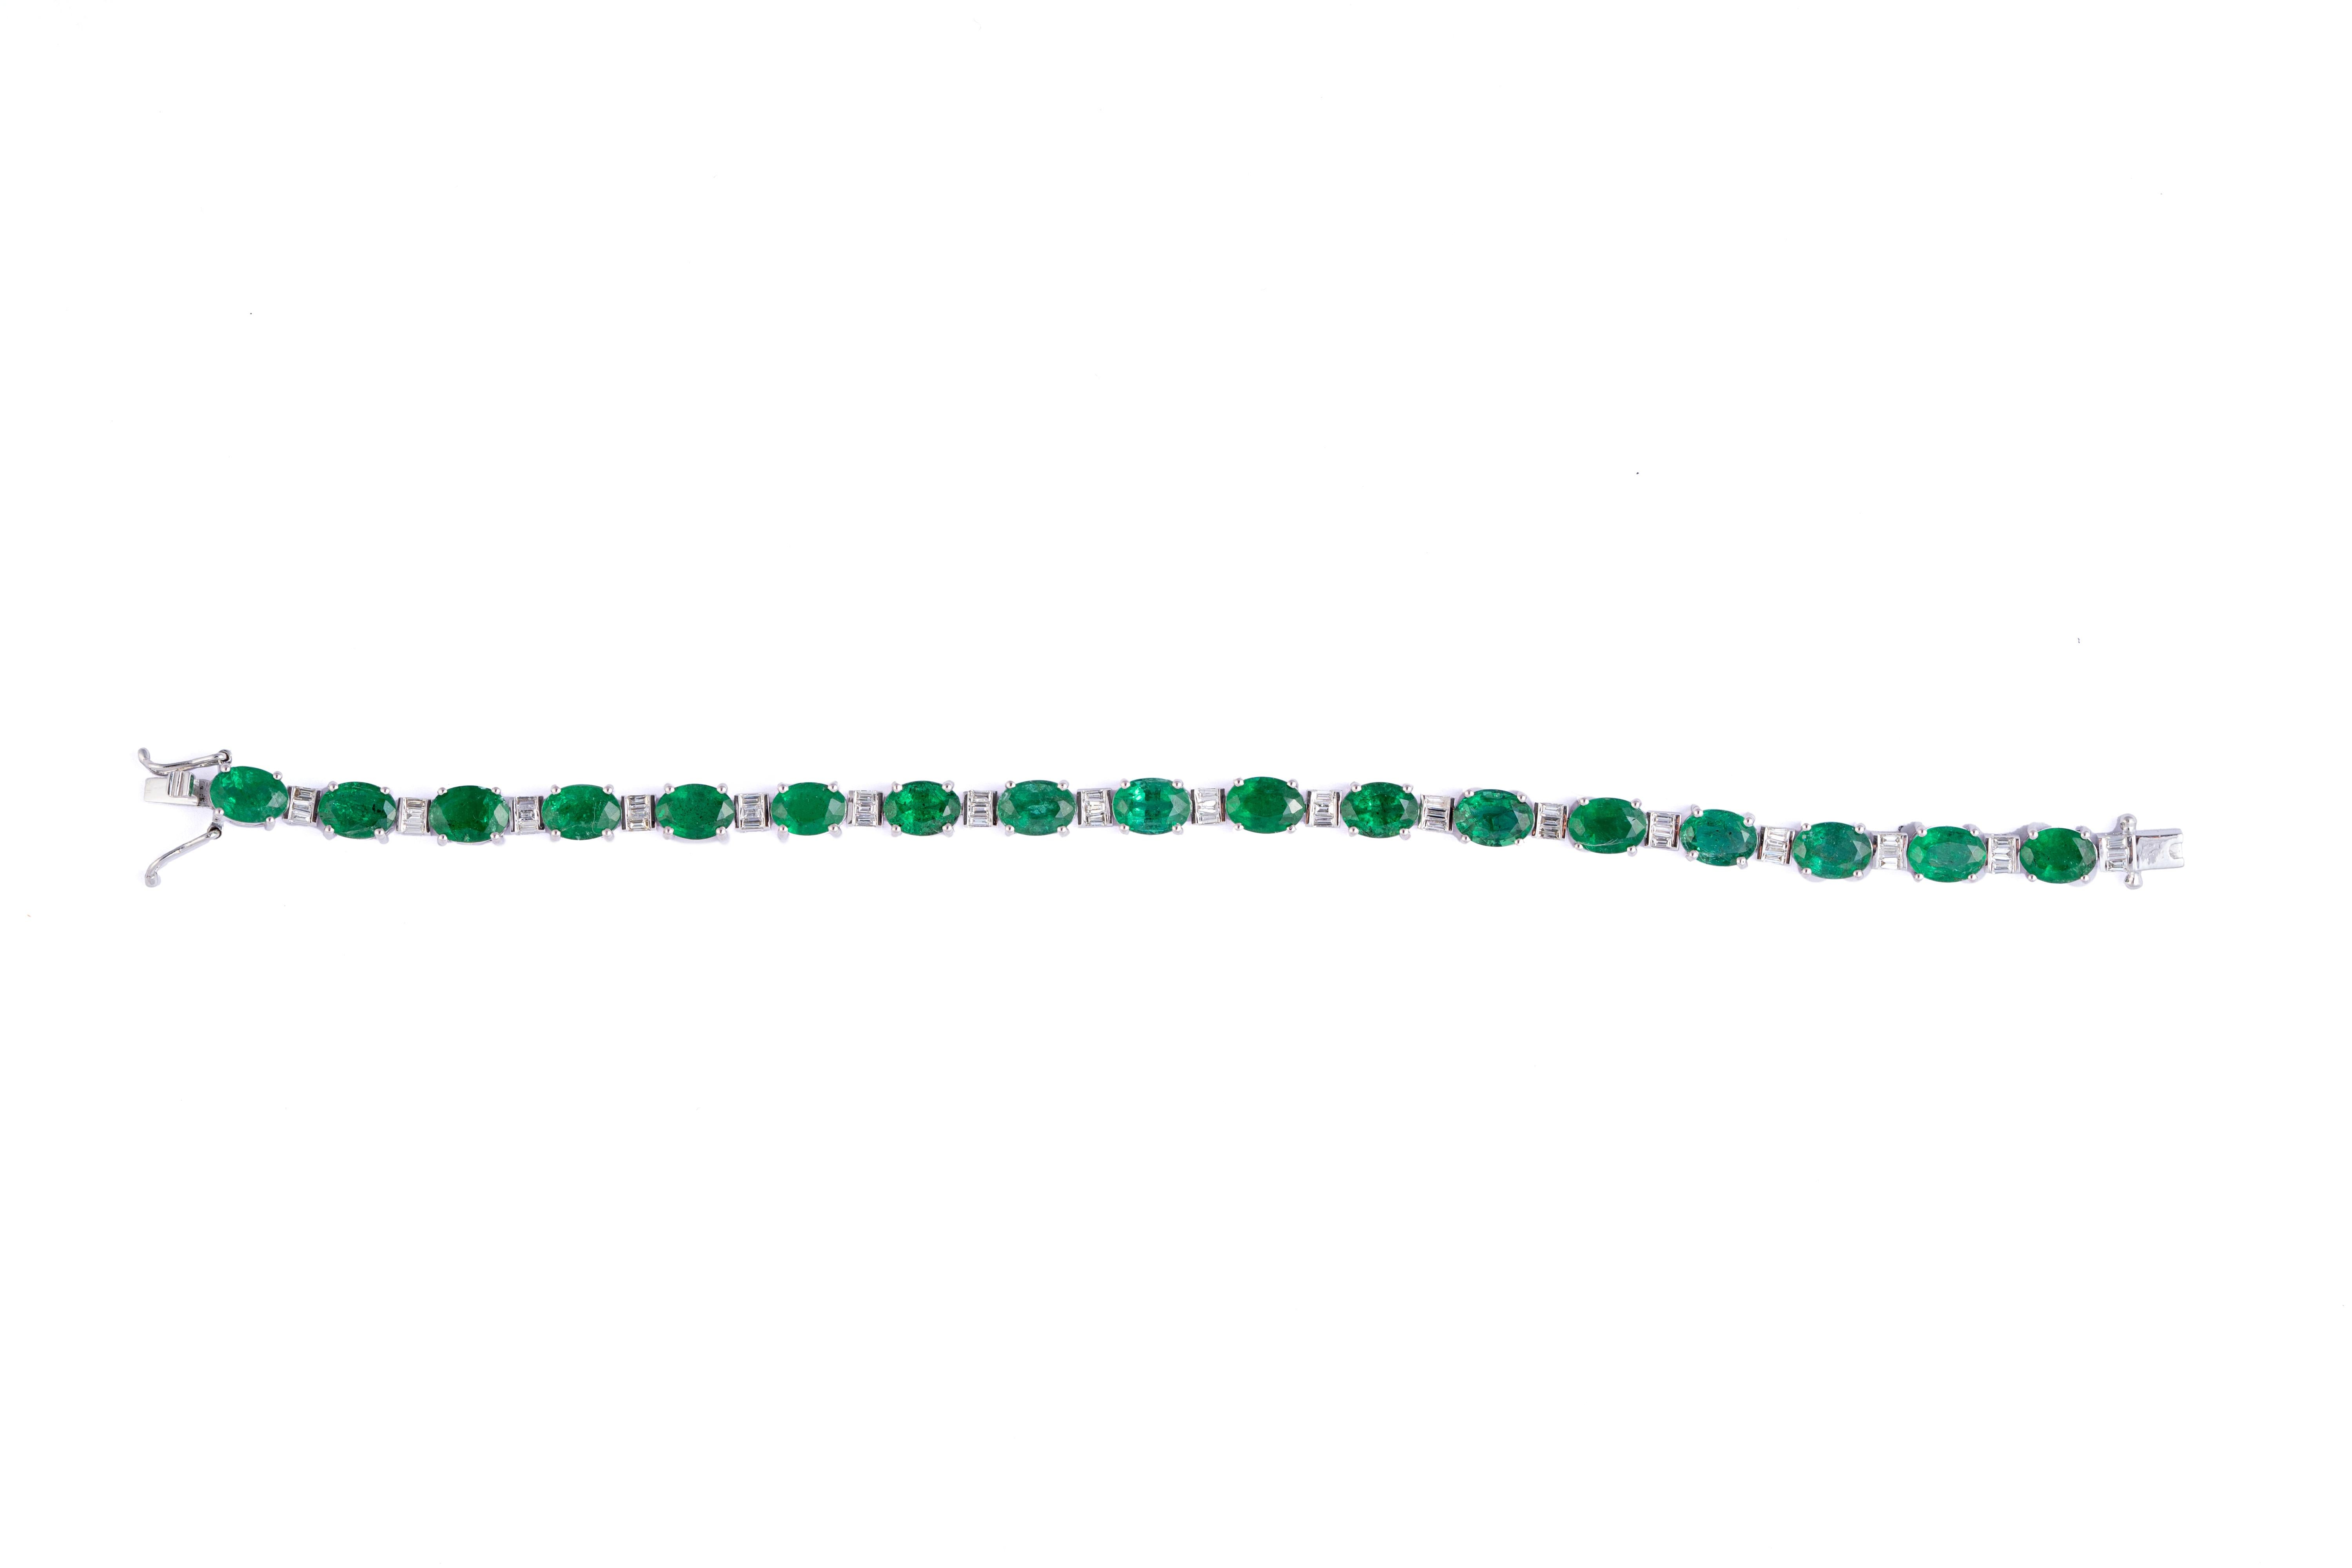 this is a stunning natural Zambian tennis bracelet with diamonds . emerald is of very good quality and so are diamonds which are vsi clarity and G colour.

emeralds : 13.06 cts
diamonds : 0.74 cts
gold : 11.290gms

Its very hard to capture the true